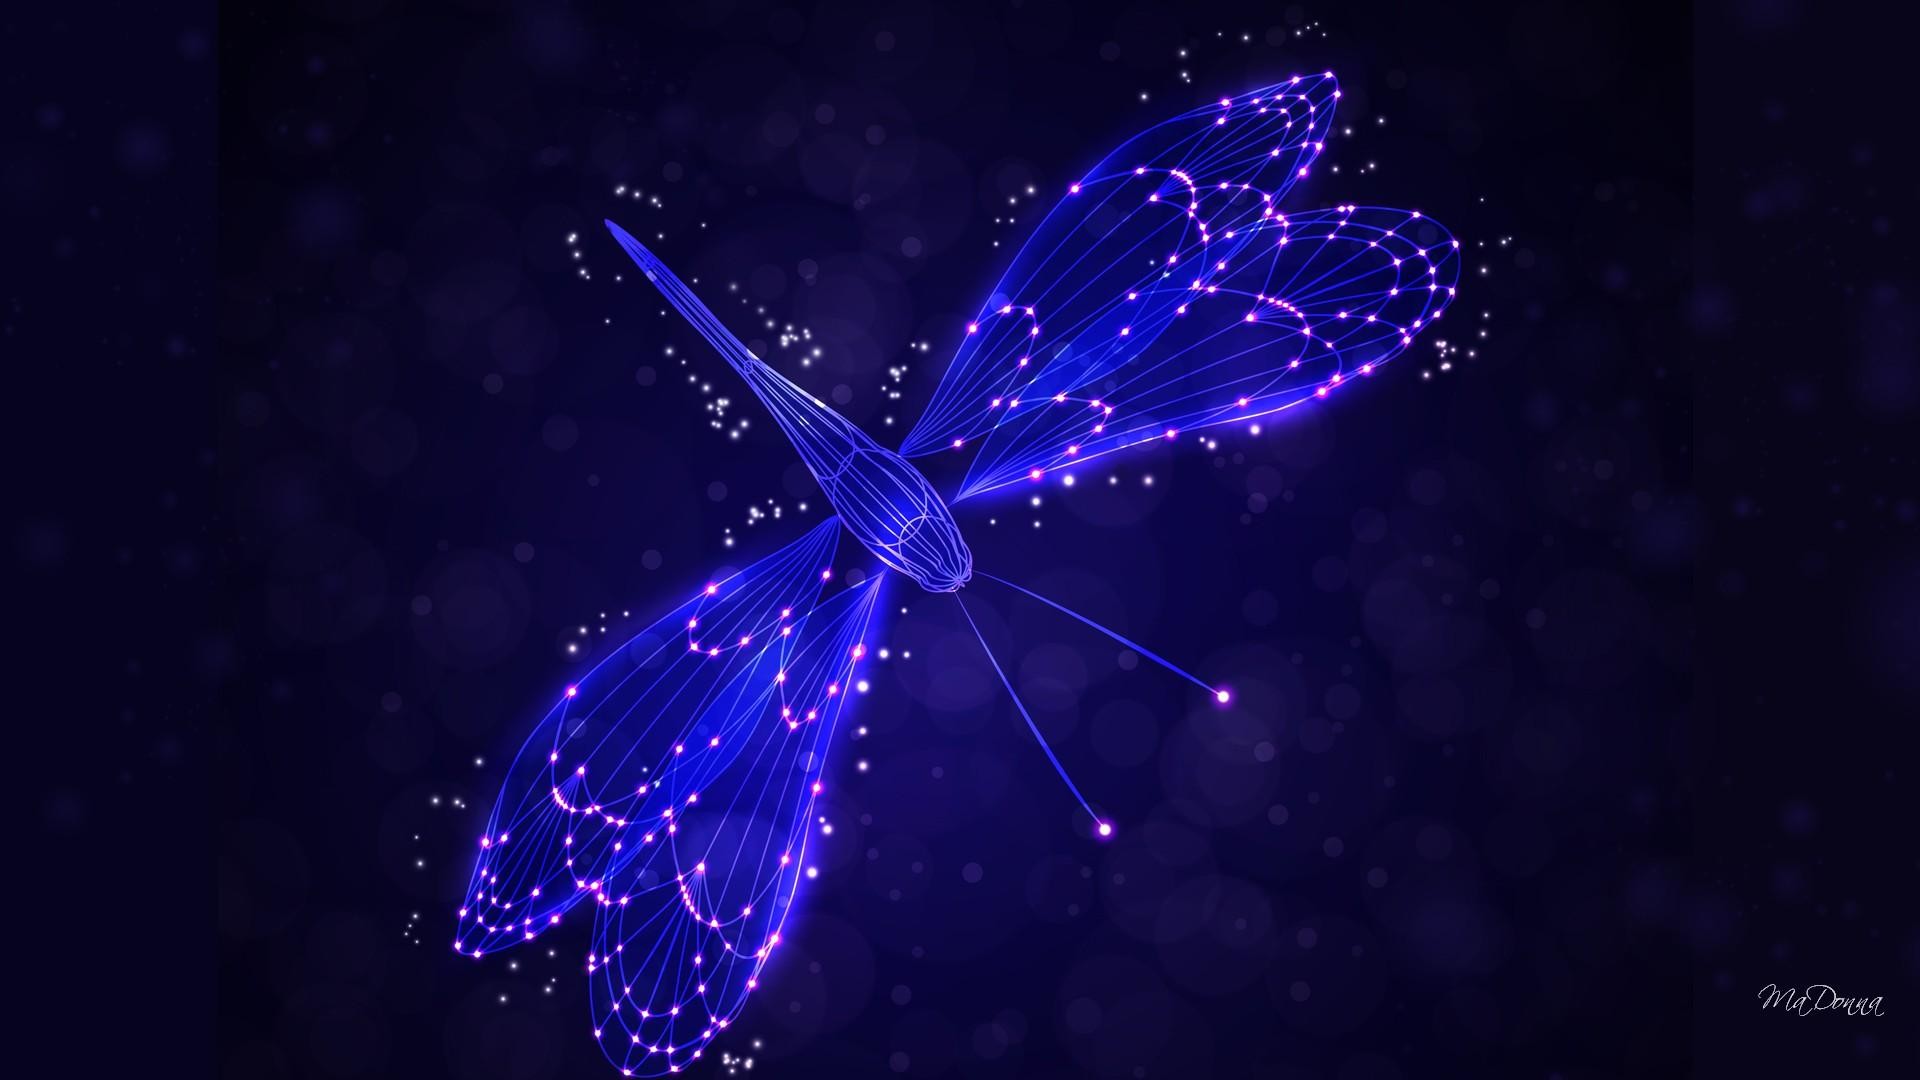 1920x1080 ... Dragonfly Wallpapers, Dragonfly Wallpapers | Dragonfly Awesome .